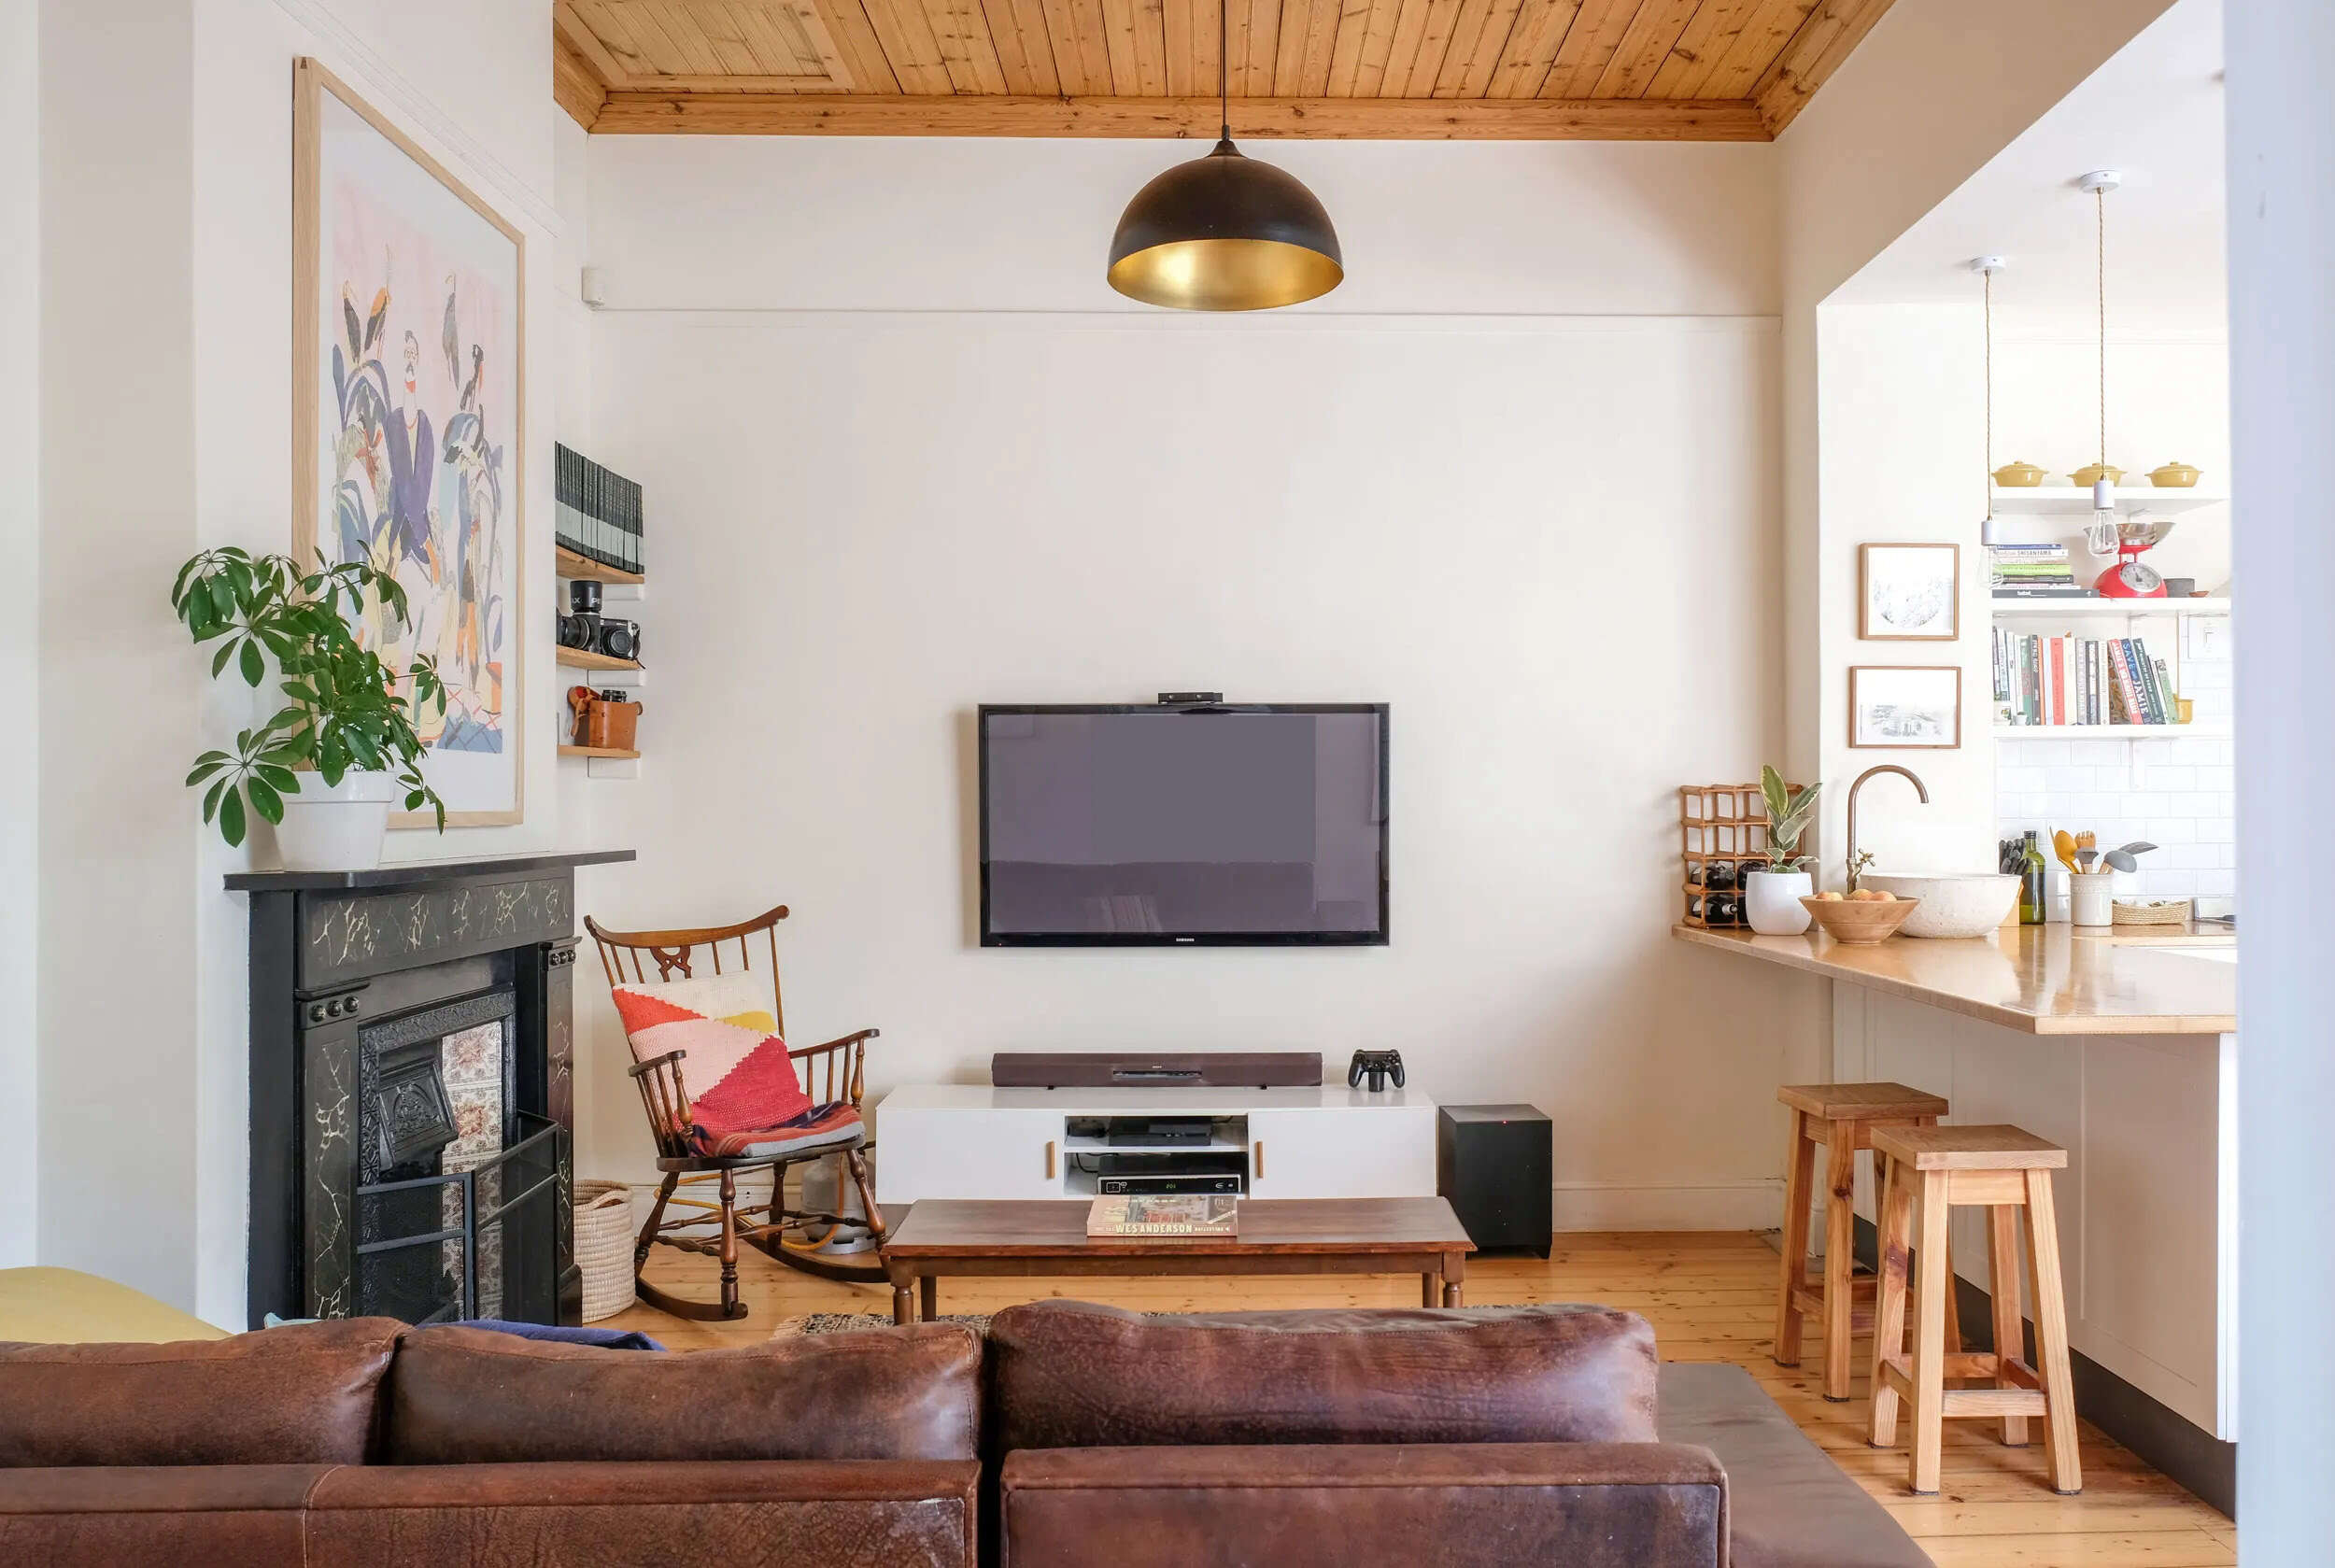 Where To Mount TV In Living Room